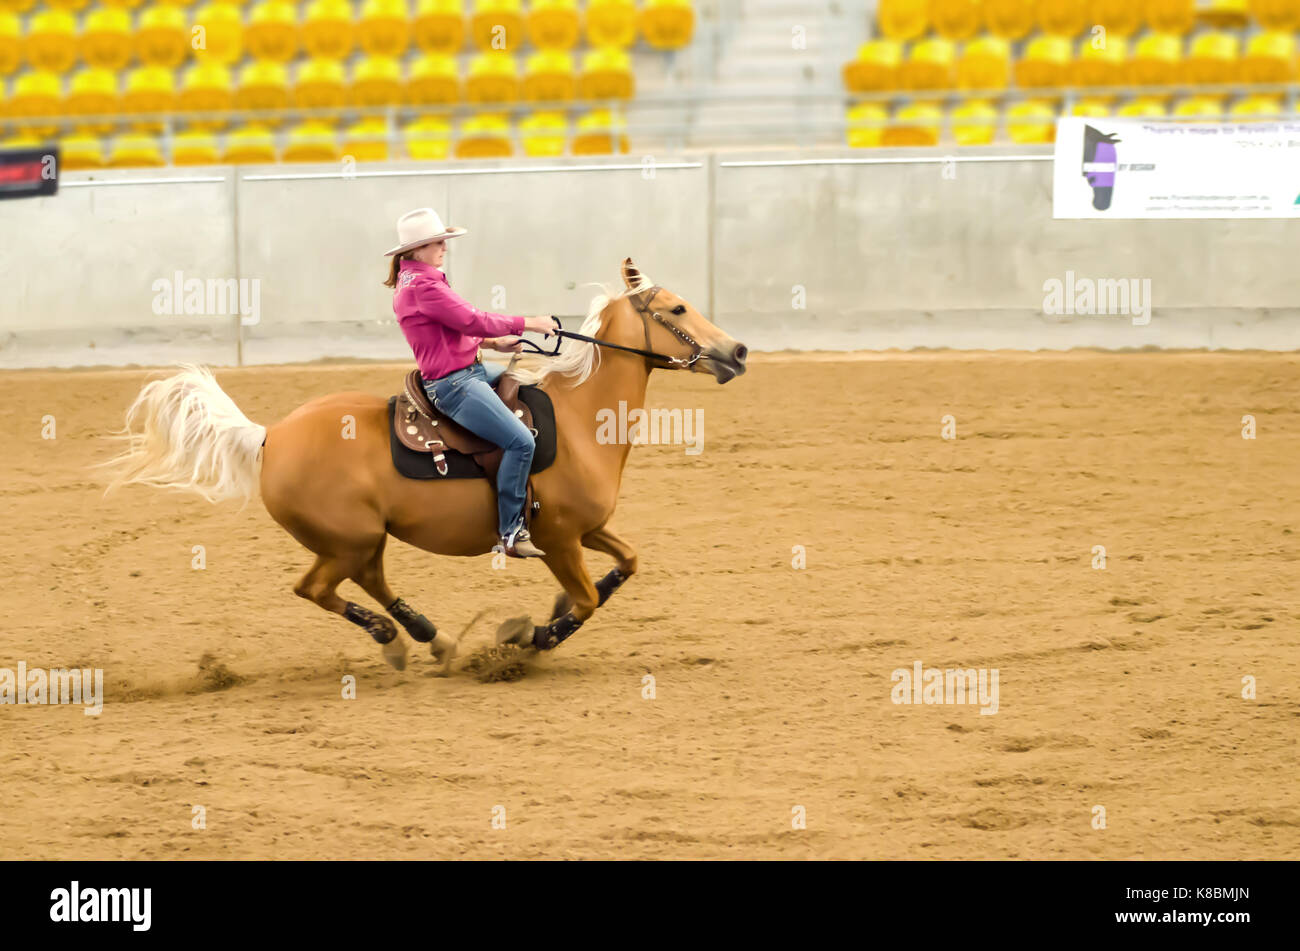 Horse Sports, Ladies National Finals Barrel Race at the Australian Equine and Livestock Events Centre (AELEC) Indoor Arena,Tamworth NSW Australia, Stock Photo